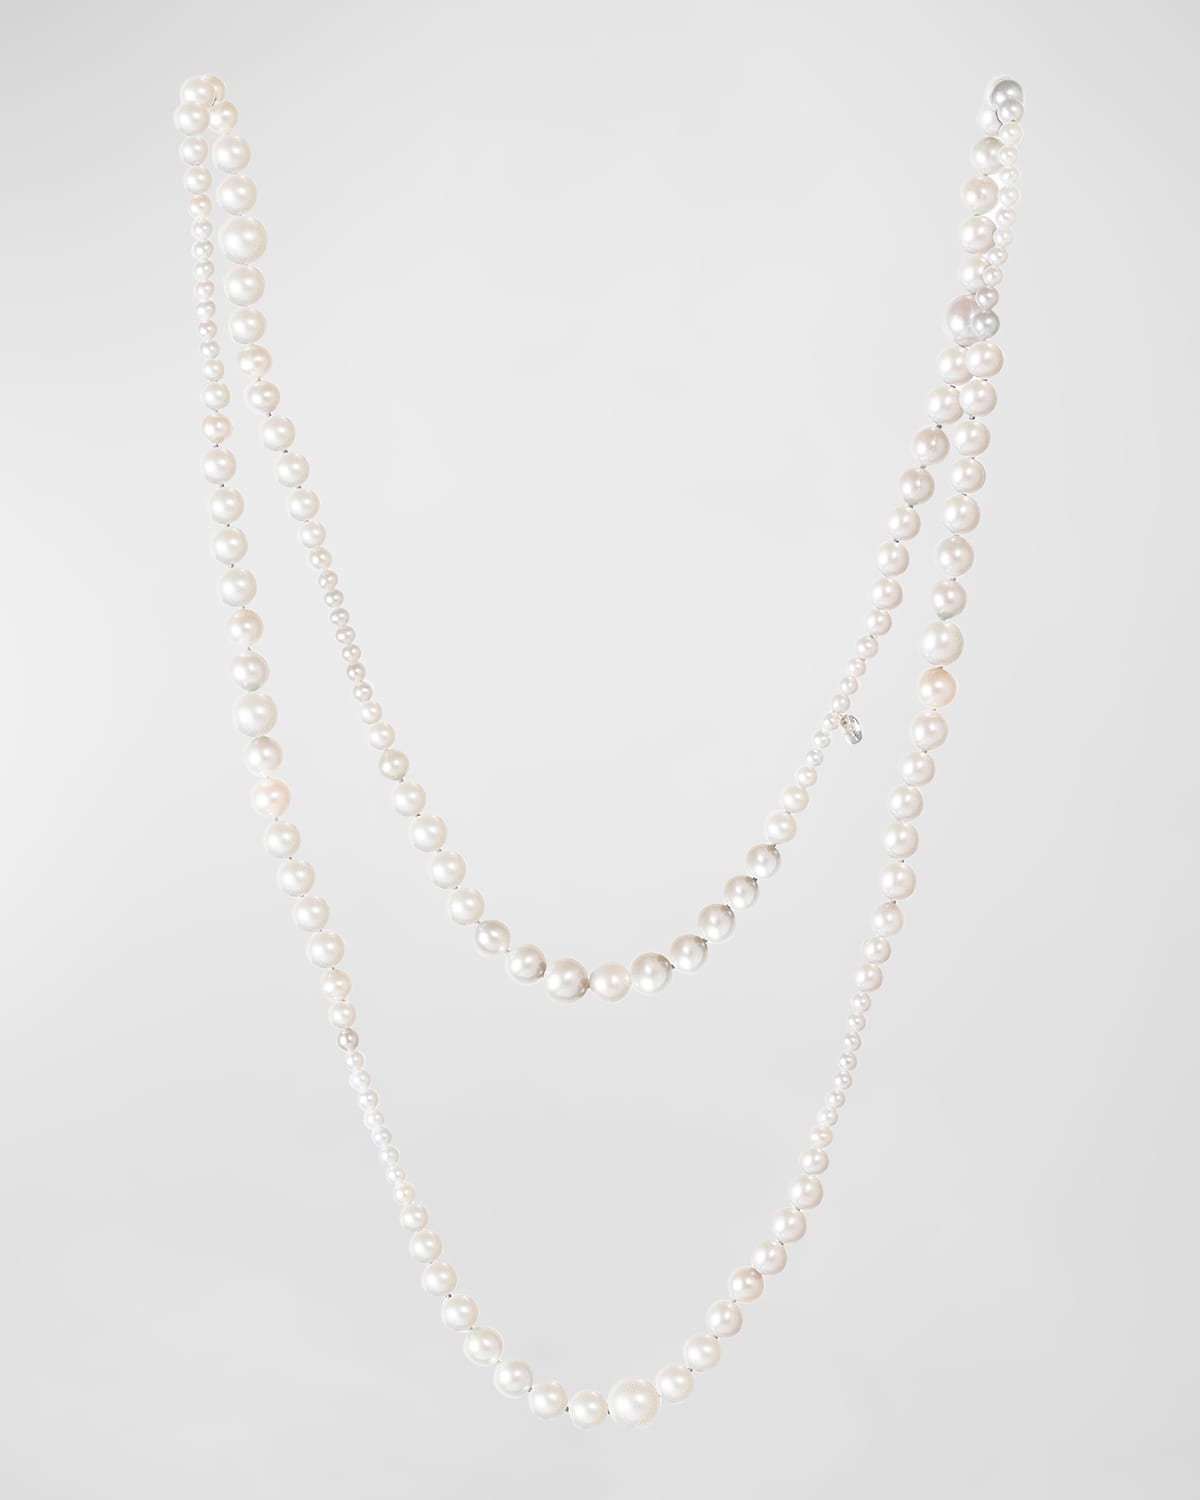 18K White Gold Necklace with Freshwater Pearls